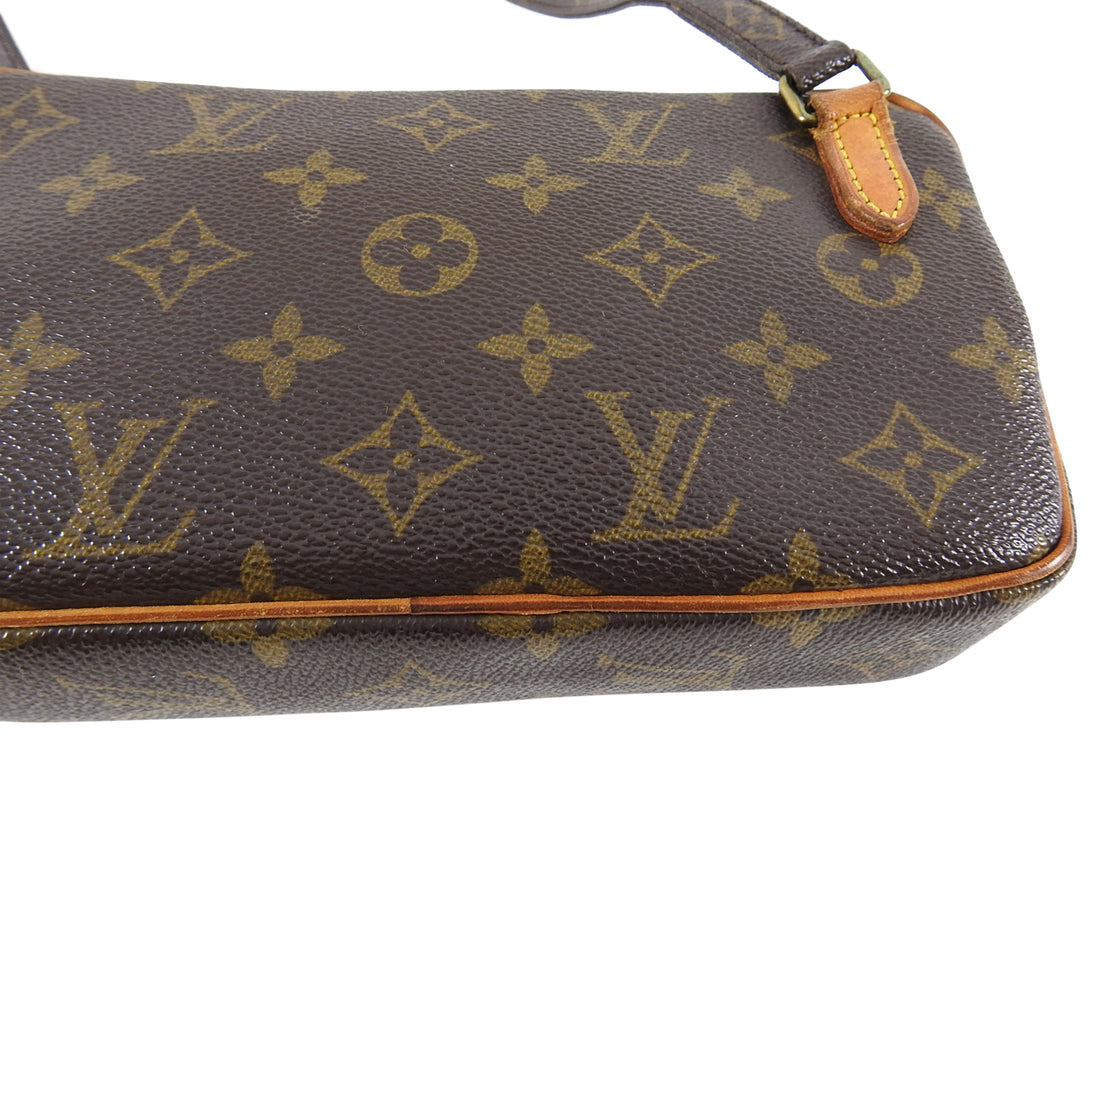 I miss you vintage - Louis Vuitton vintage 1988 Marly bandouliere crossbody  bag . . Available in store or purchase online with free ship in Canada for  orders $150+. Find additional photos